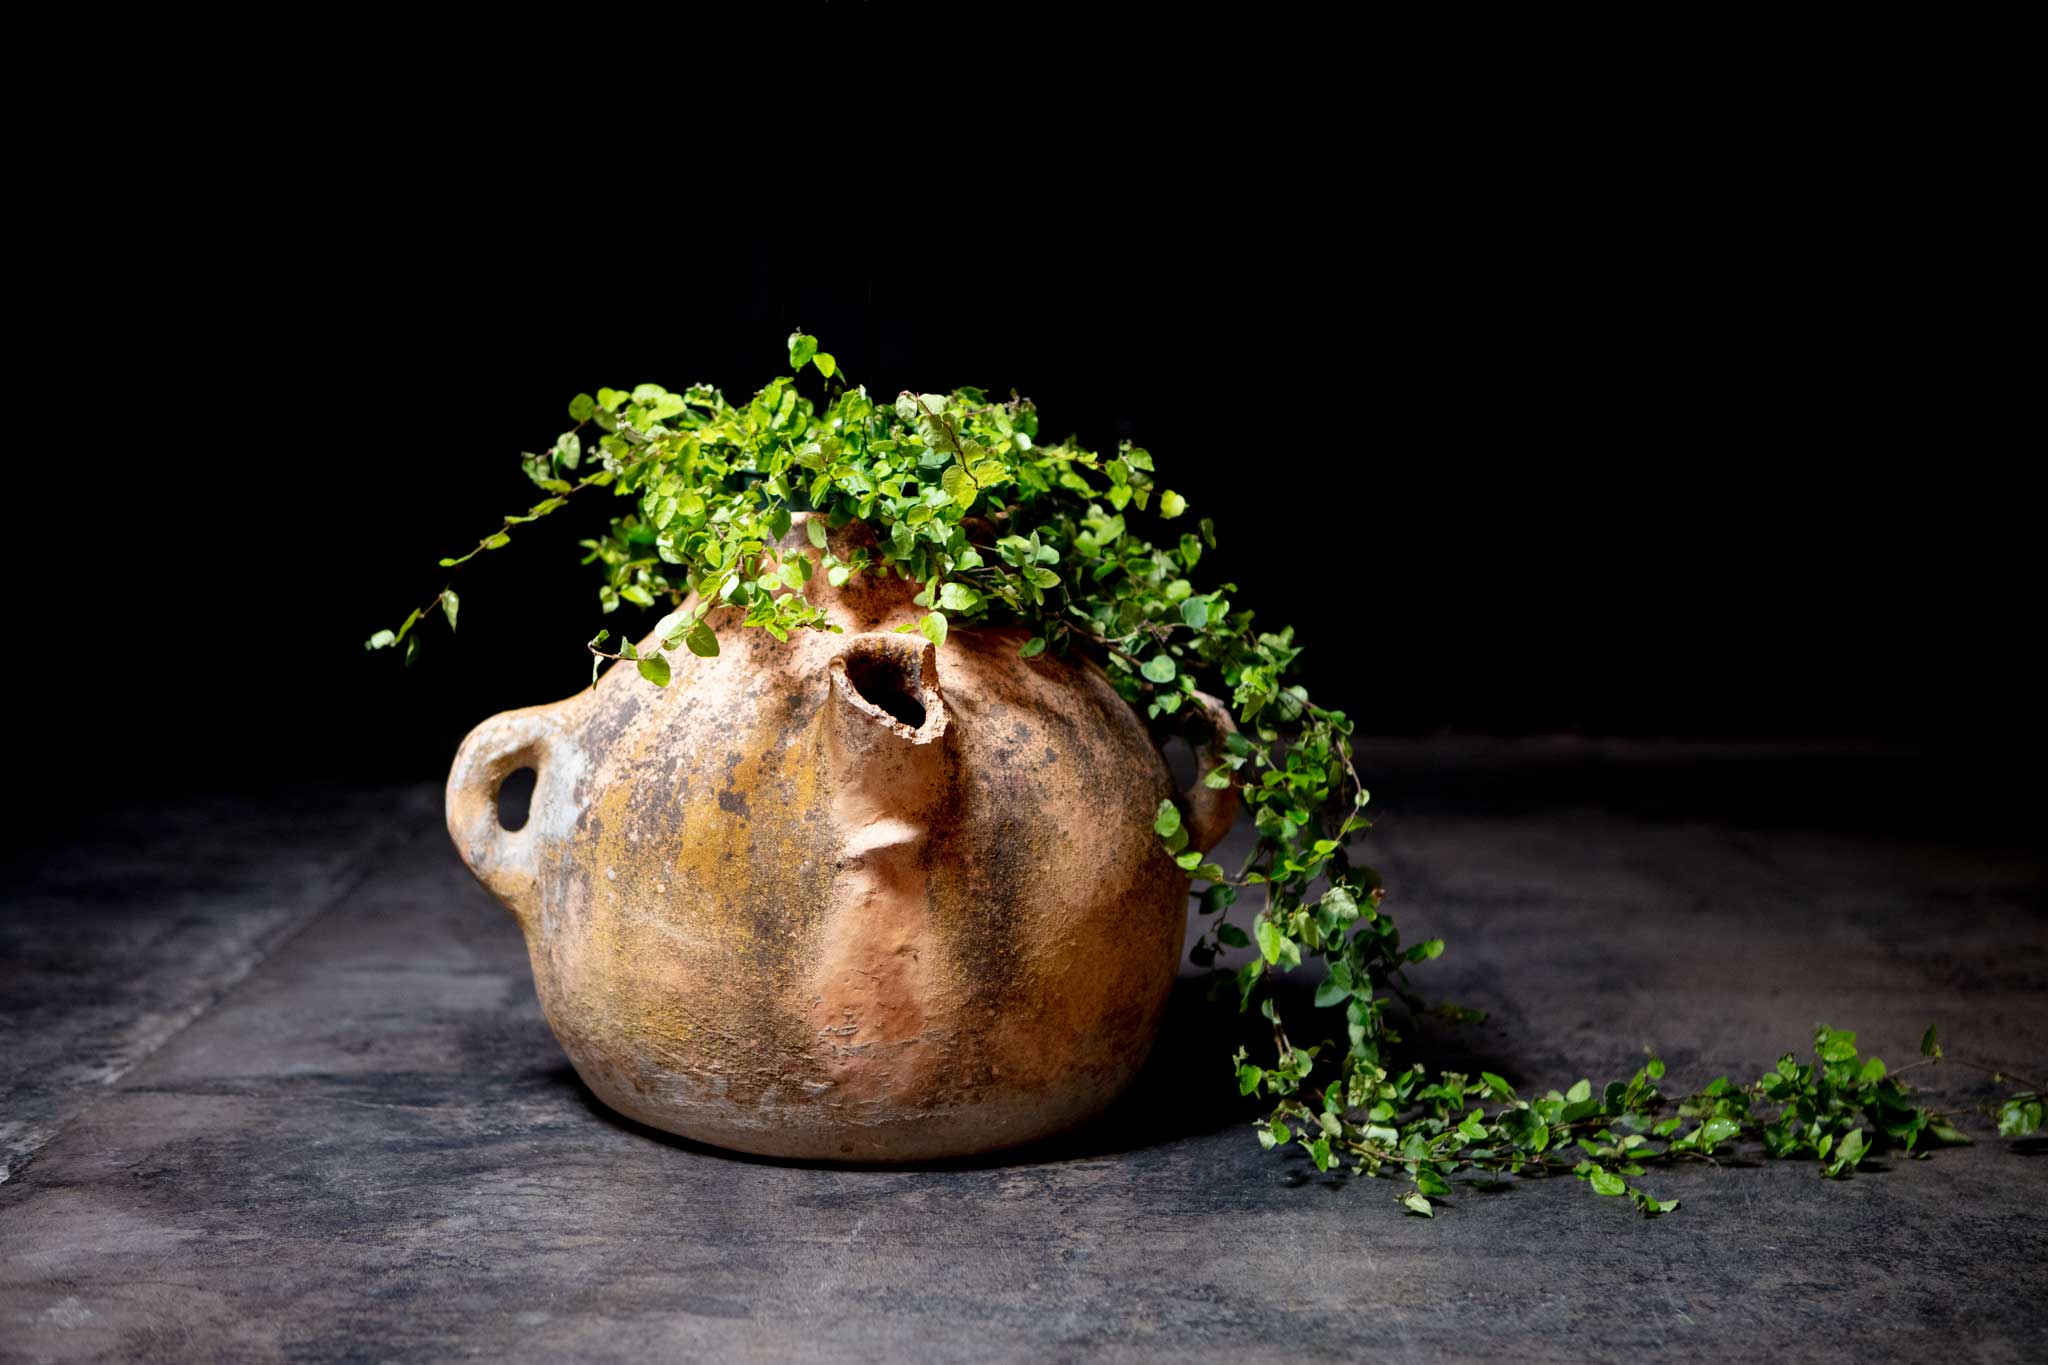 This antique Moroccan water jar is nearly 1,000 years old